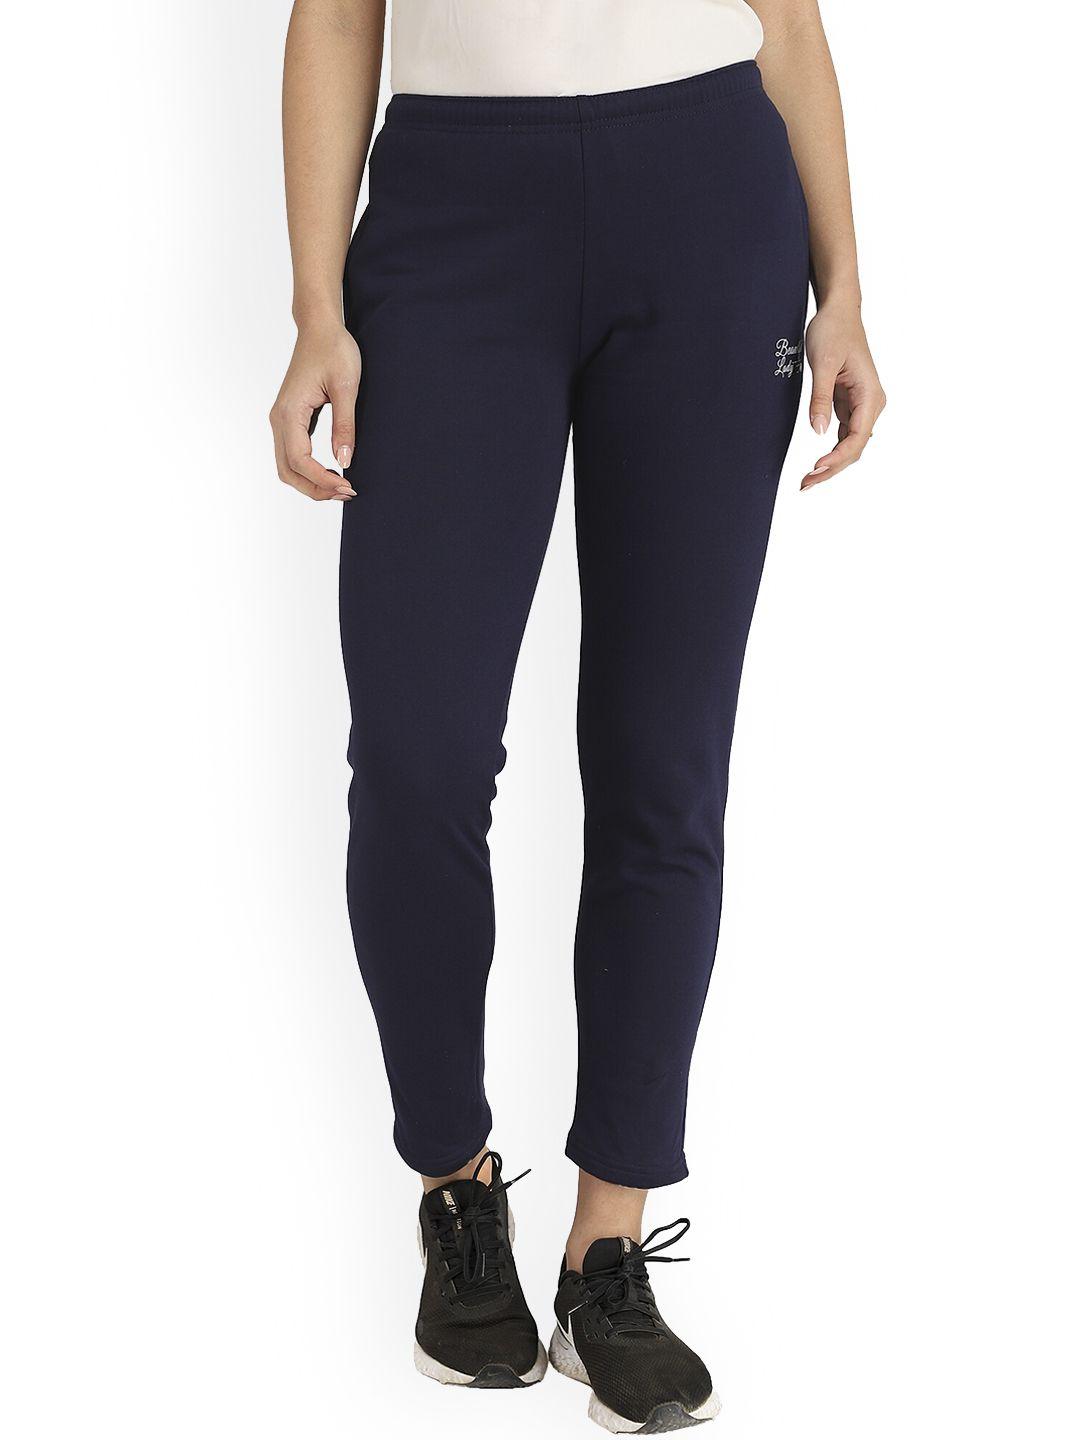 dyca women navy blue solid cotton track pants